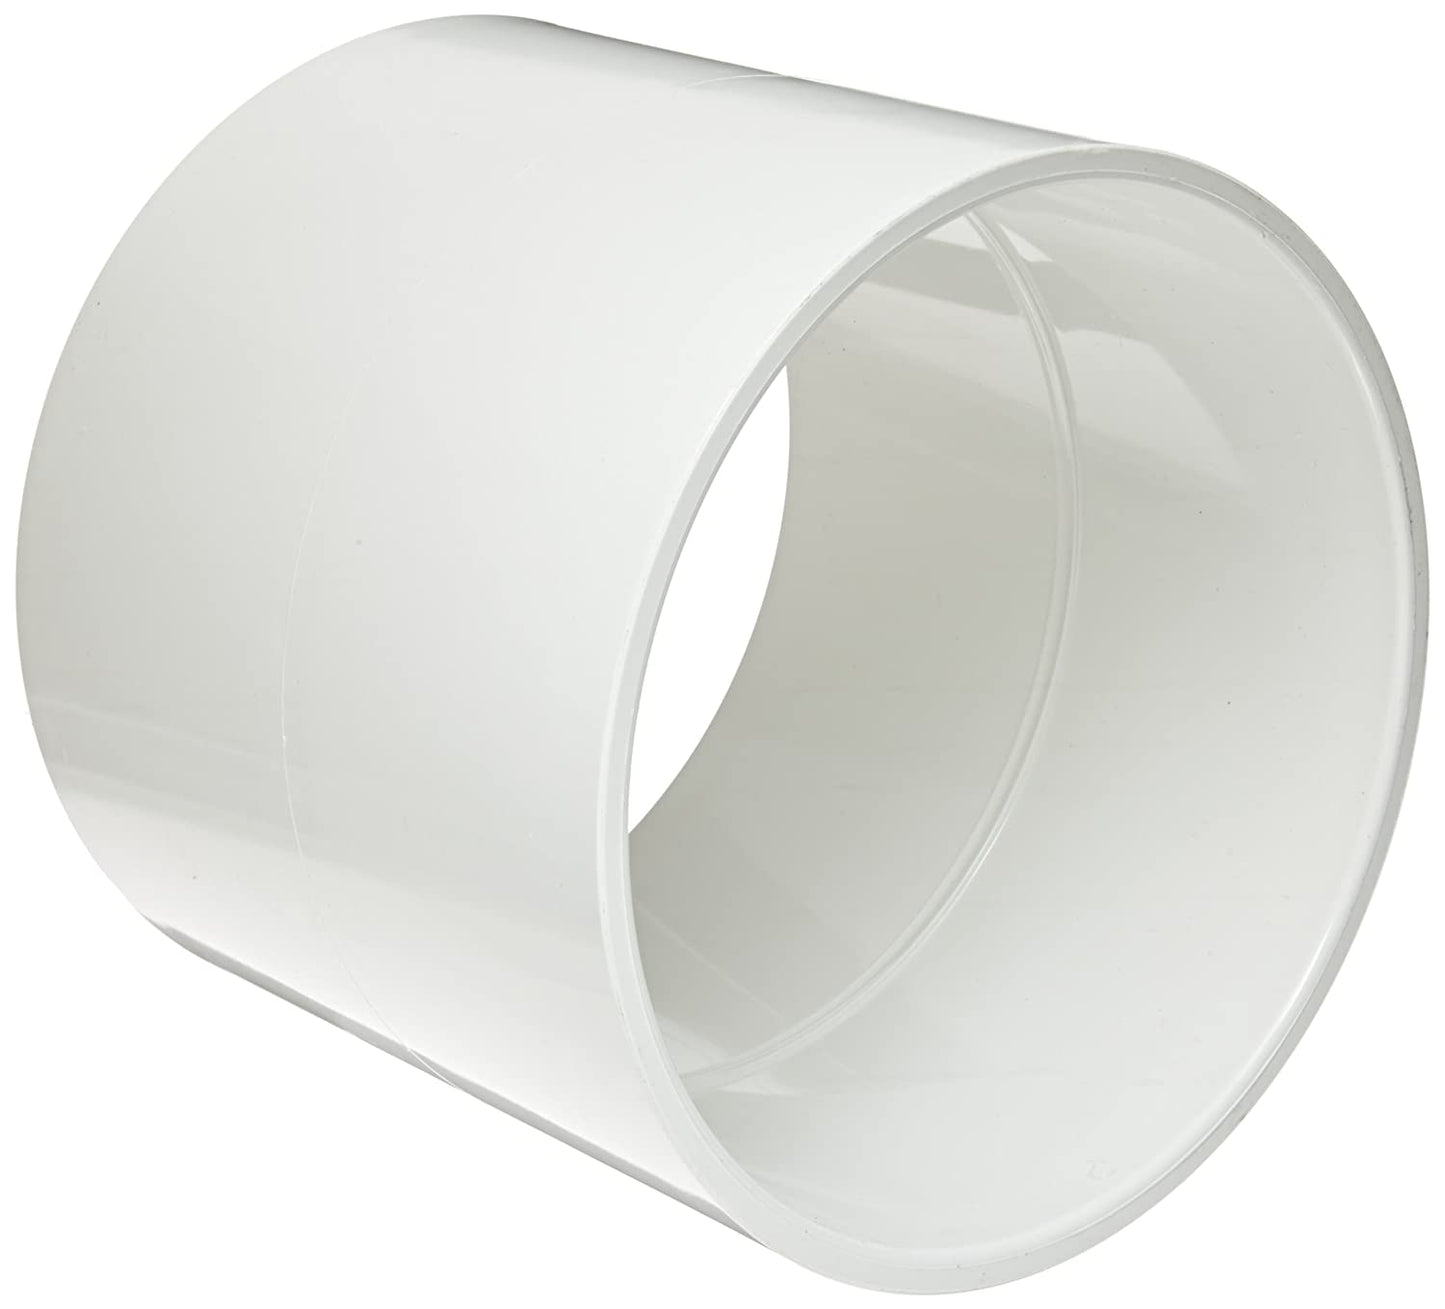 429-060 - 6" PVC Pipe Fitting, Coupling, Schedule 40, White, Socket